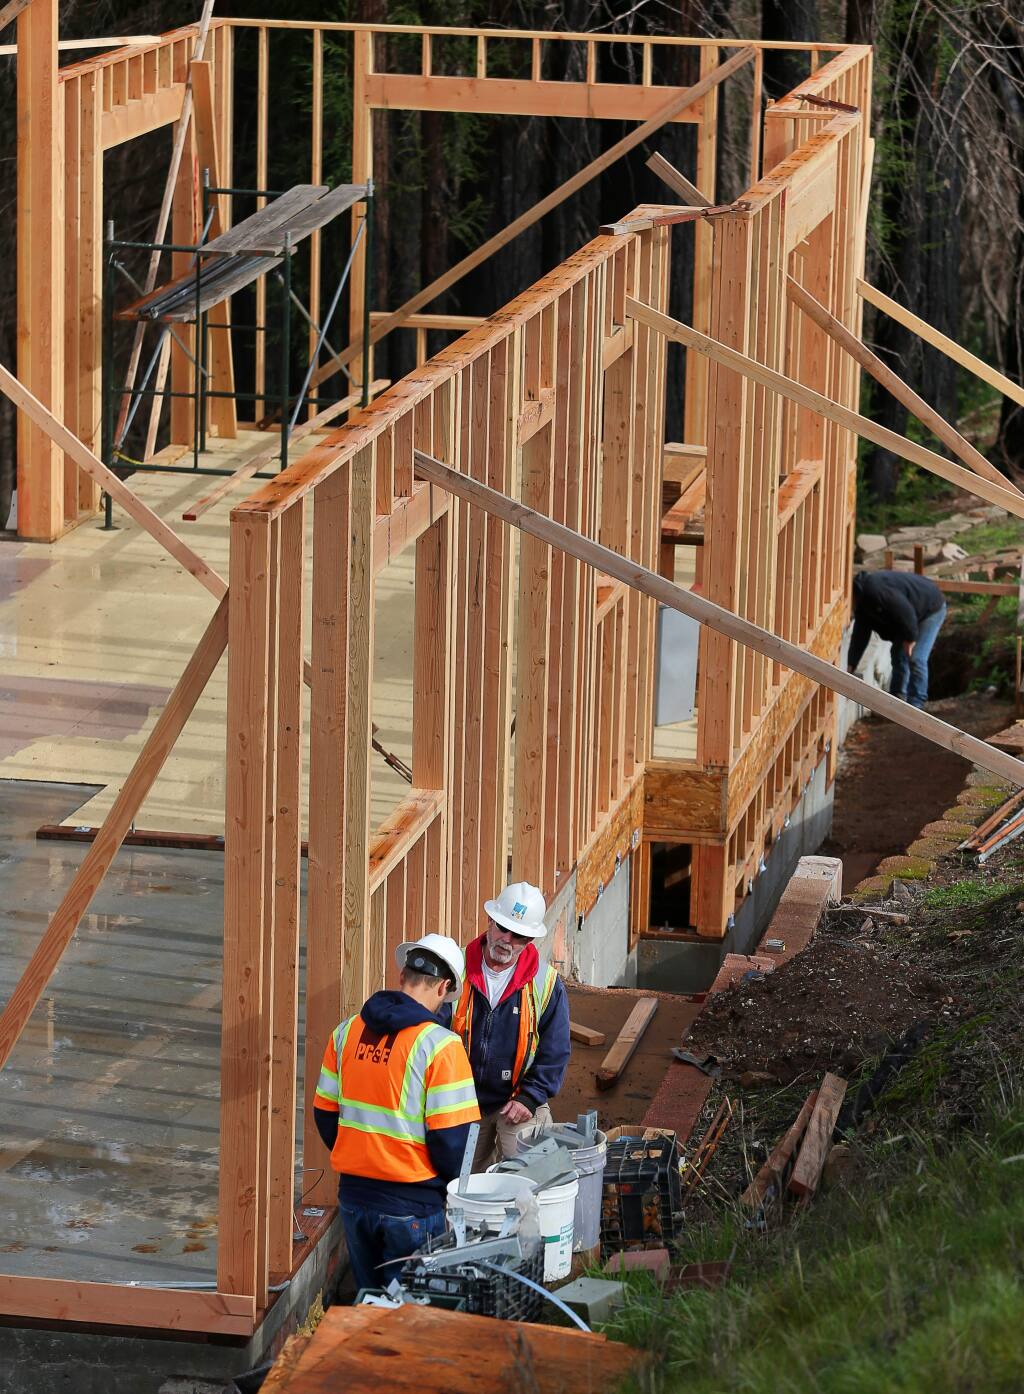 PG&E workers look at a house being rebuilt on Skyfarm Drive in the Fountaingrove area of Santa Rosa, as they work on restoring residential power on Monday, Jan. 14, 2019. (CHRISTOPHER CHUNG/ PD)